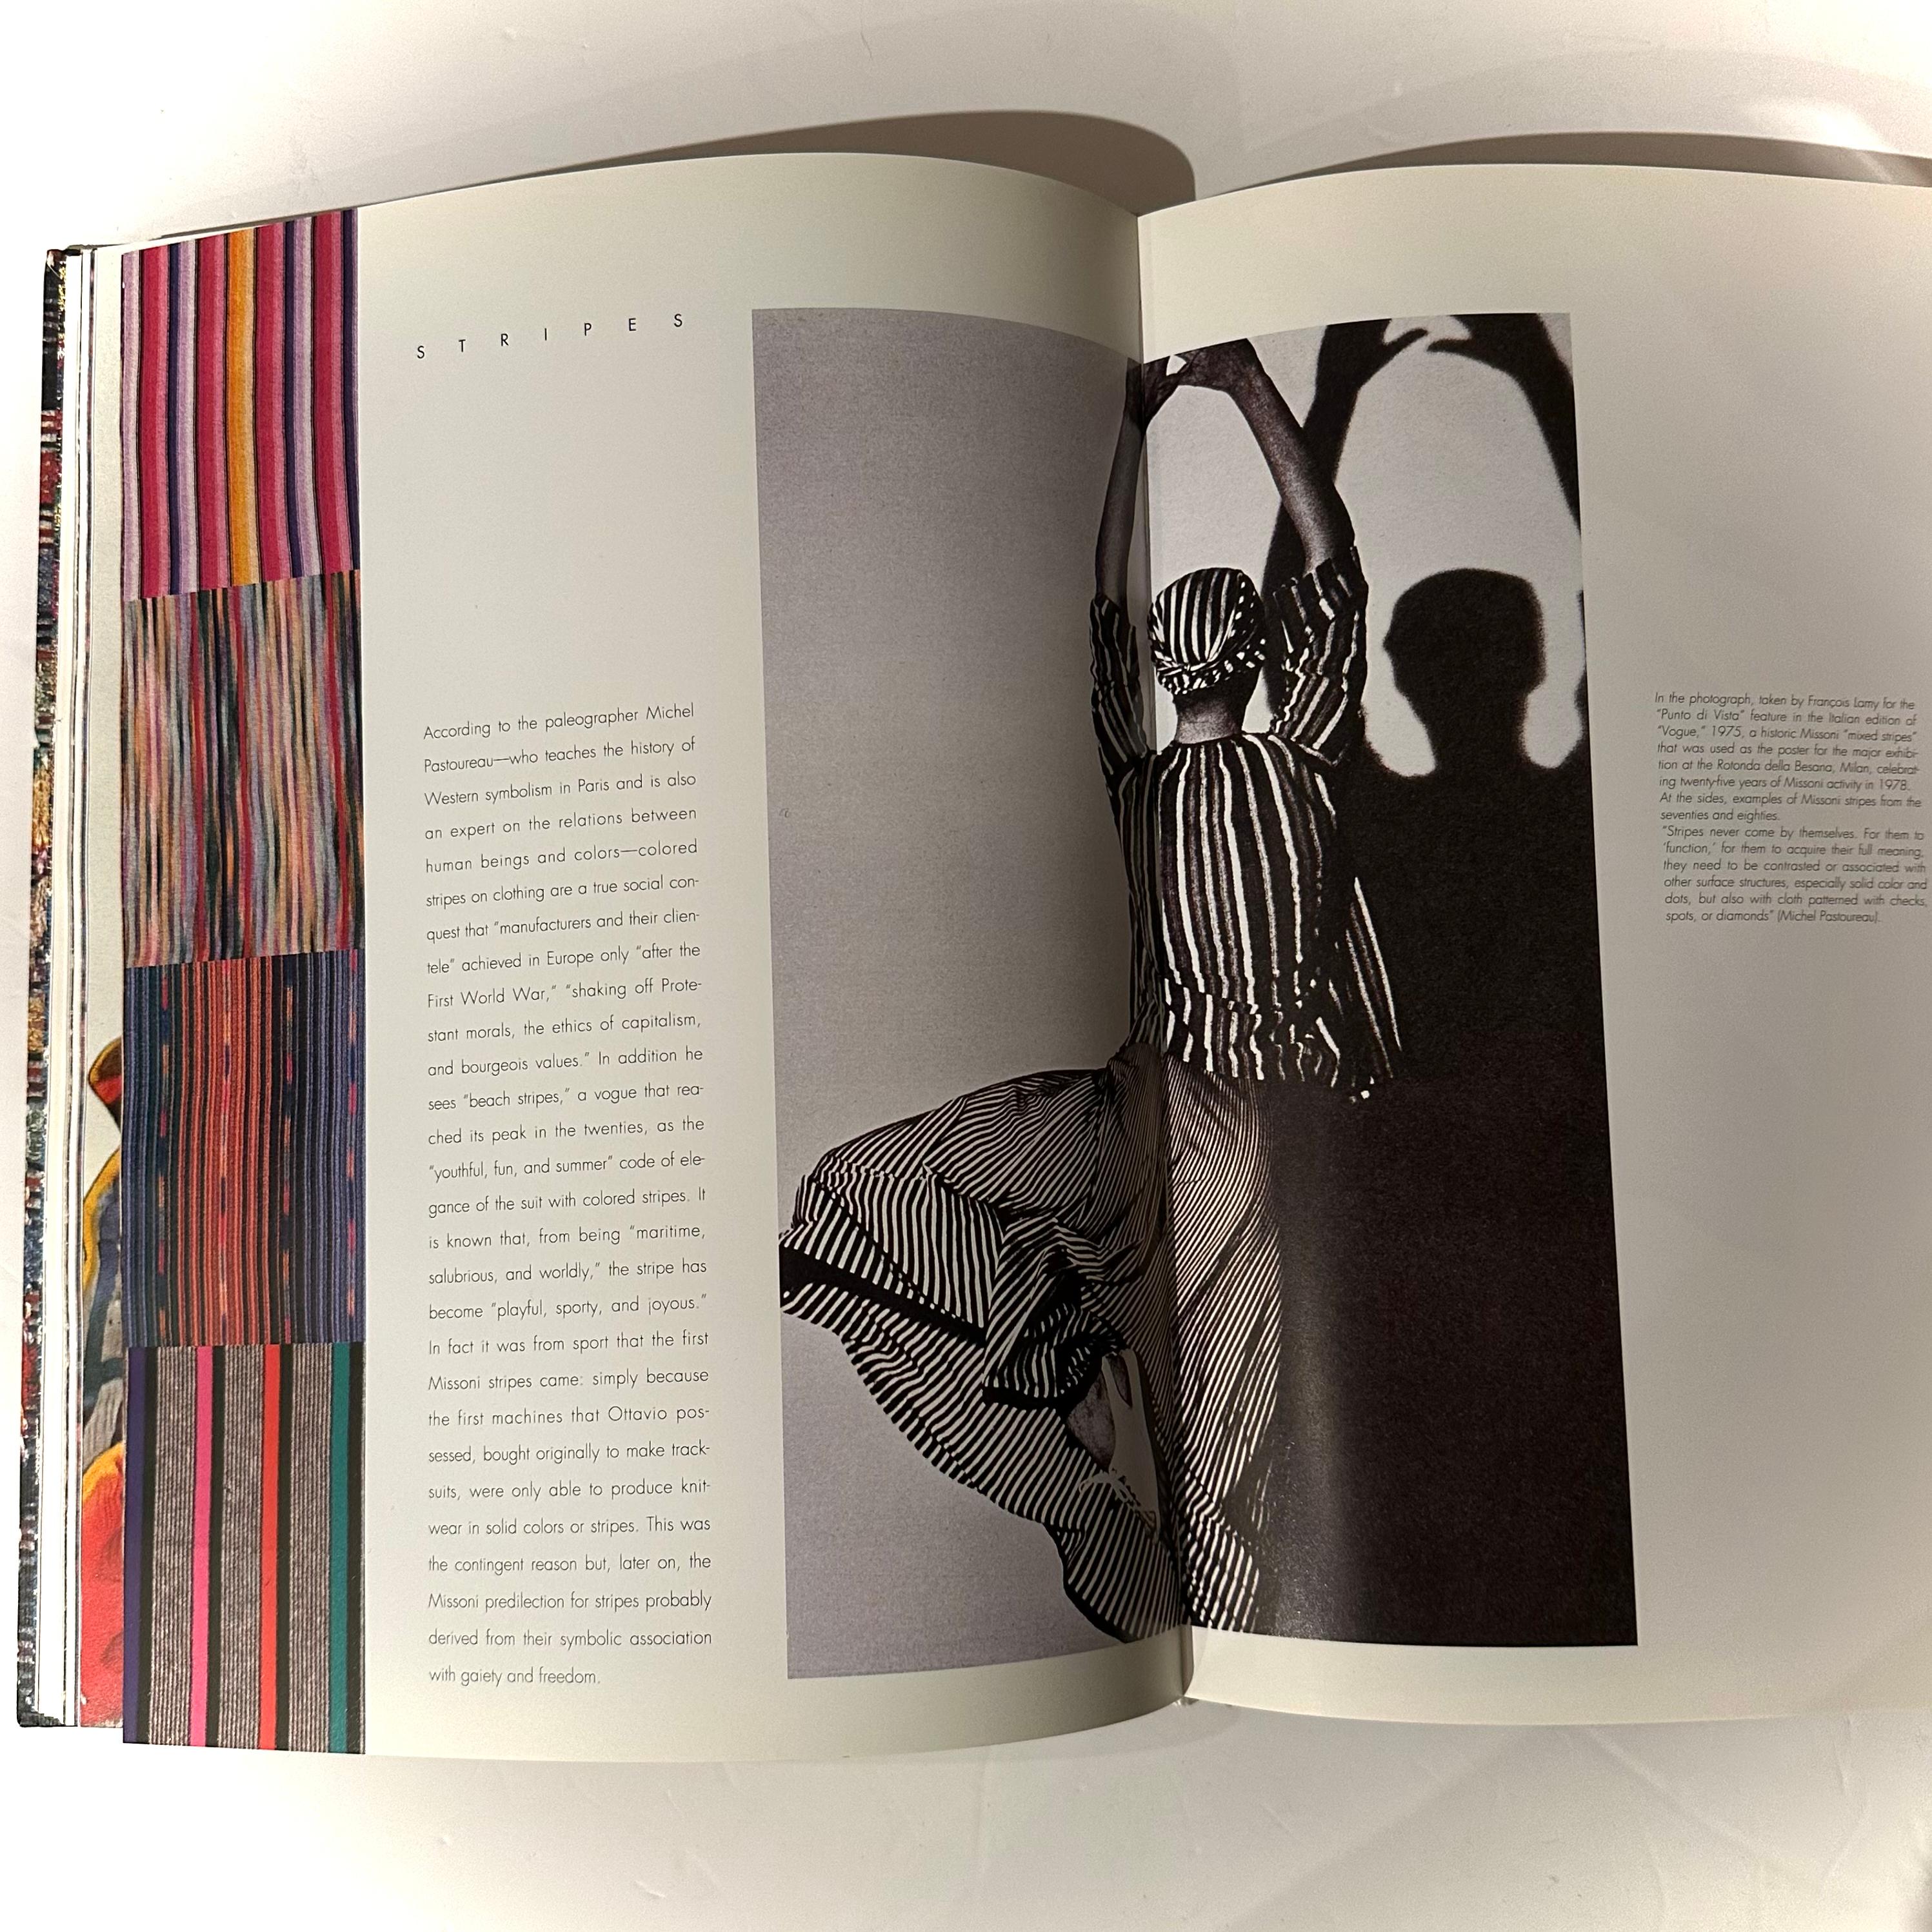 Published by Electa/Abbeville, 1st U. S. edition, New York, 1995. Hardback with English text.

This book was originally published on the occasion of the Pitti Immagine Prize award in Firenze, 1994. A complete retrospective of Missoni’s adventure was